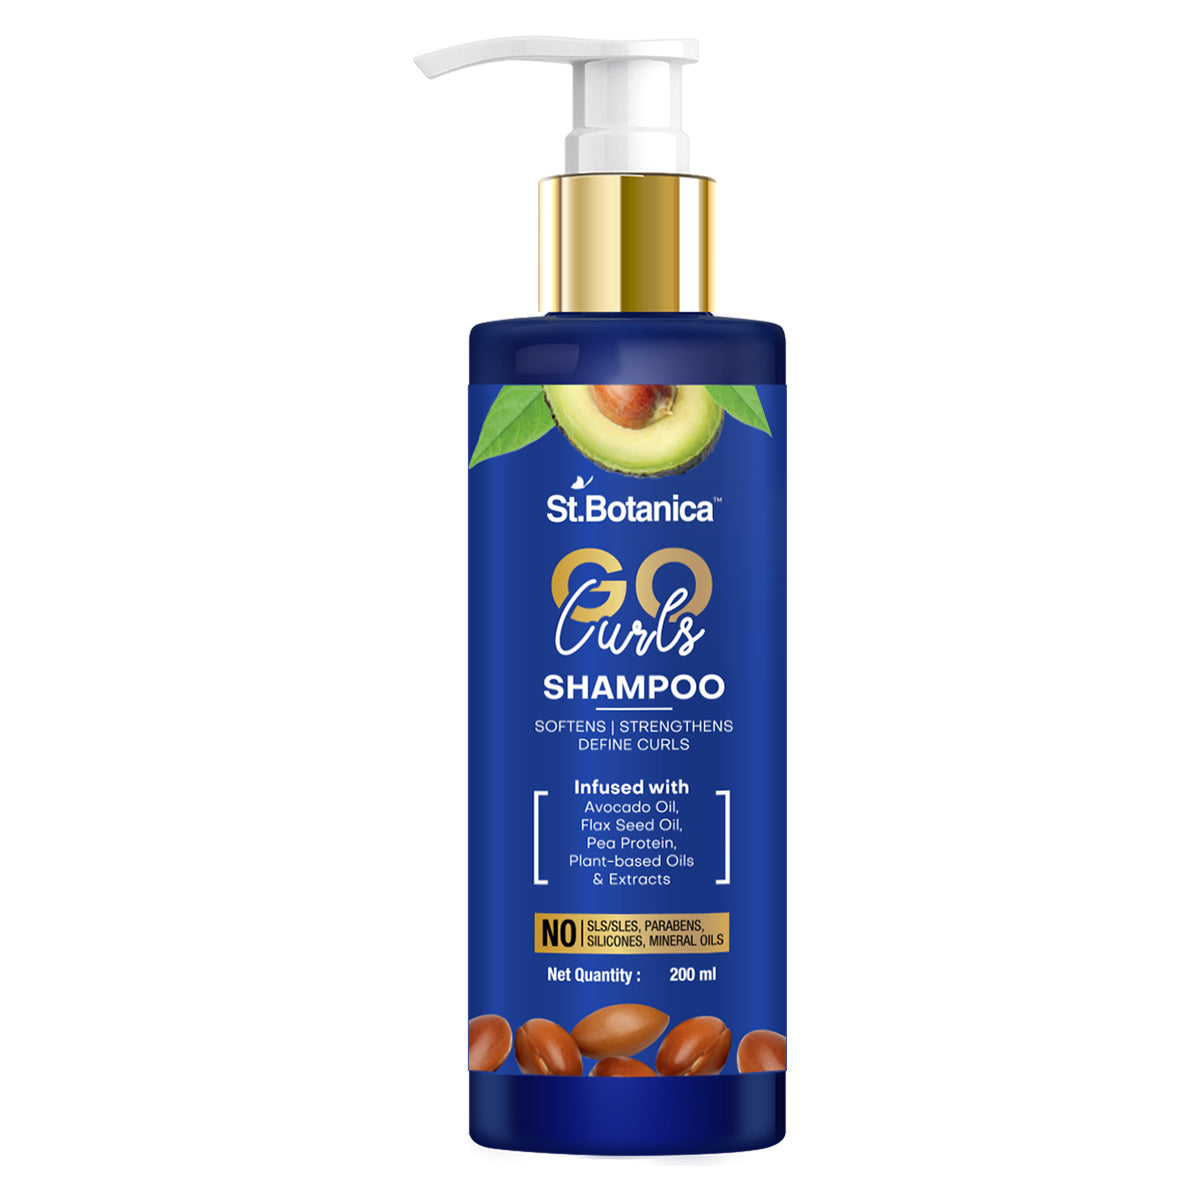 St.Botanica Go Curls Hair Shampoo - With Avocado Oil, Flaxseed Oil, Pea Protein, No Sls/ Sulphate, Paraben, Silicones, Colors, 200 ml